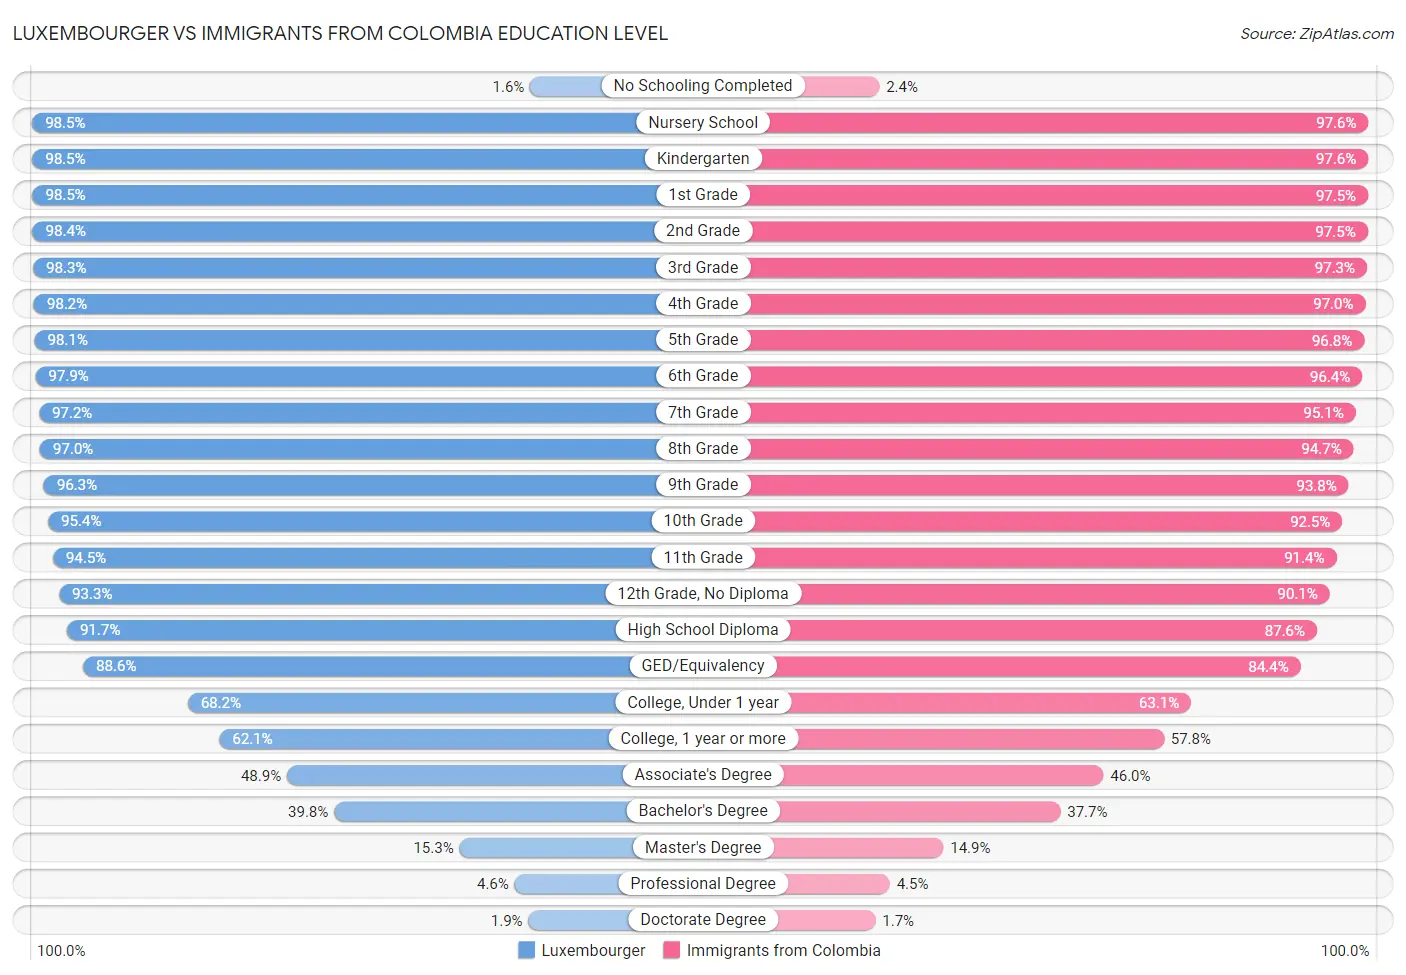 Luxembourger vs Immigrants from Colombia Education Level